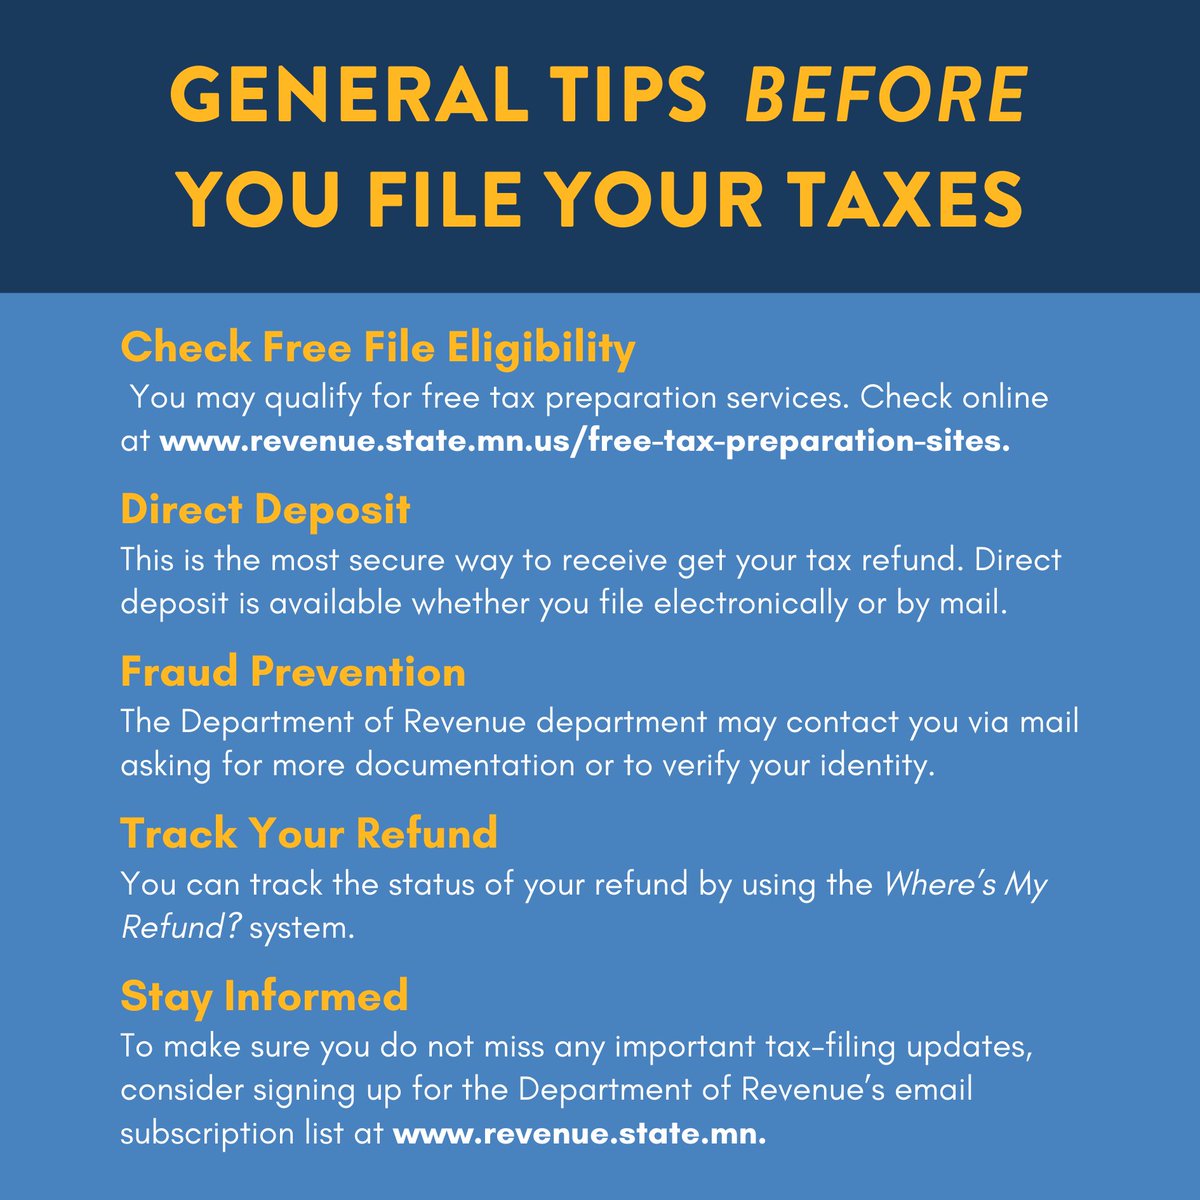 Tax filing season is coming to a close! April 15th is the deadline to file both federal and state tax returns. Here are some quick filing tips and tricks to make your tax filing process smoother.